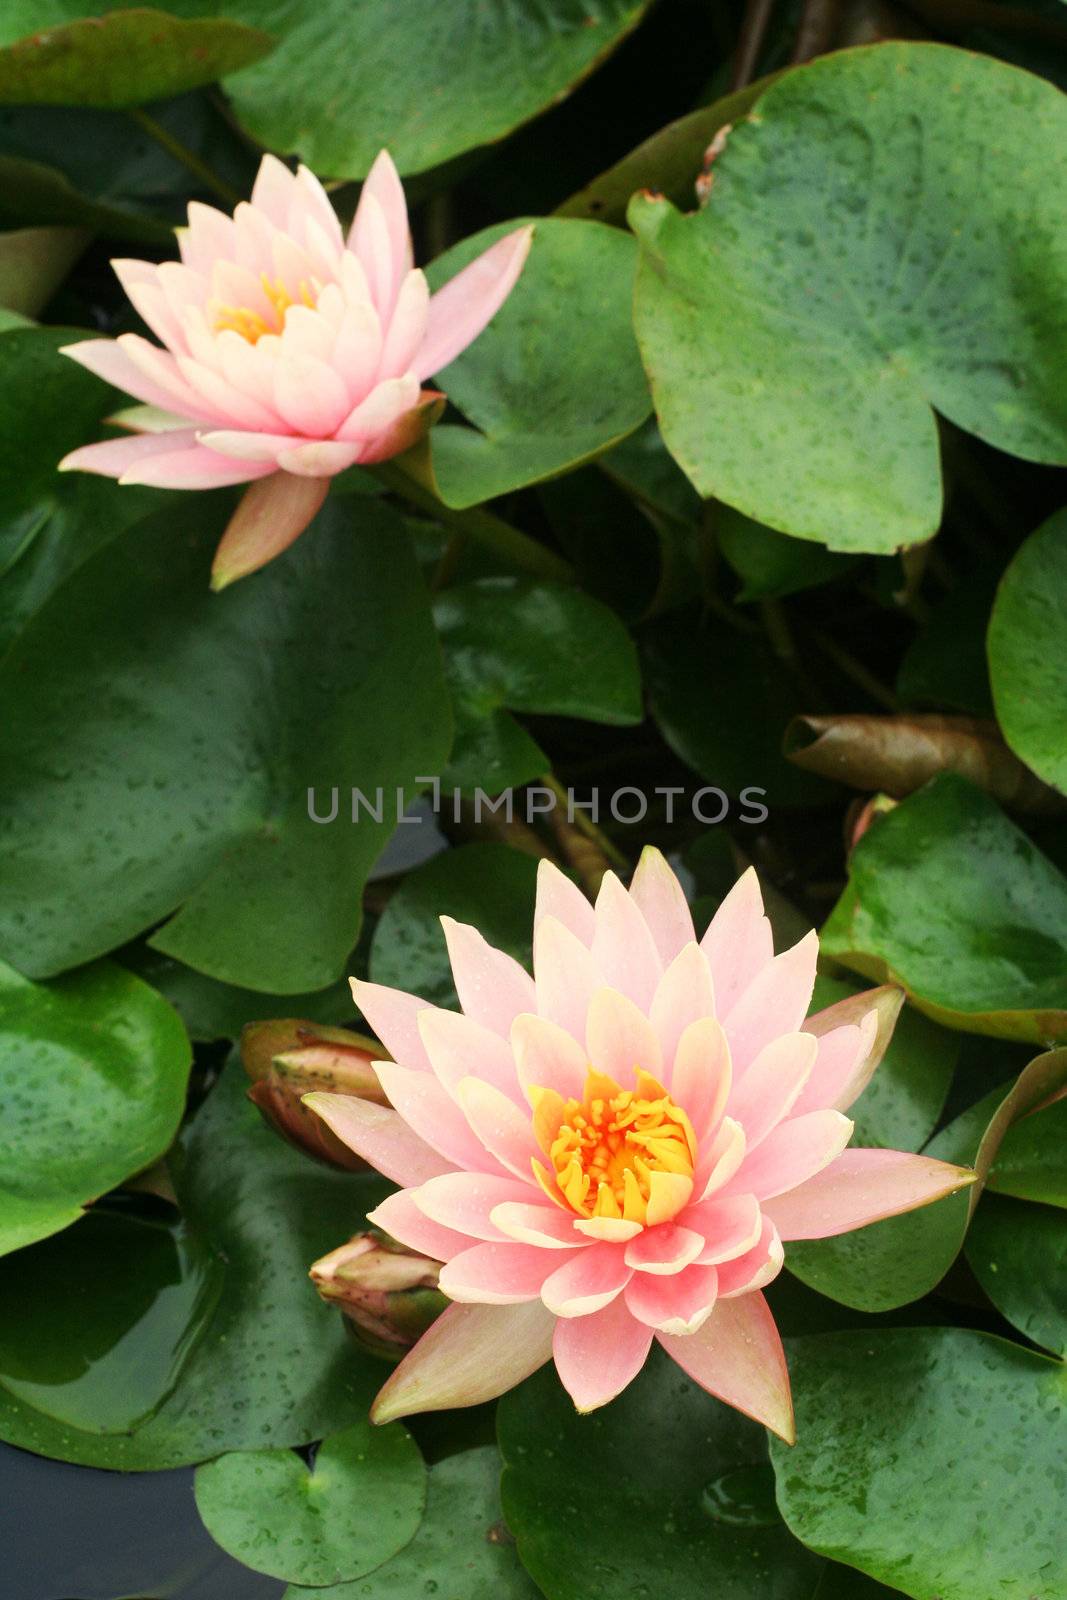 waterlily by Jayone1981